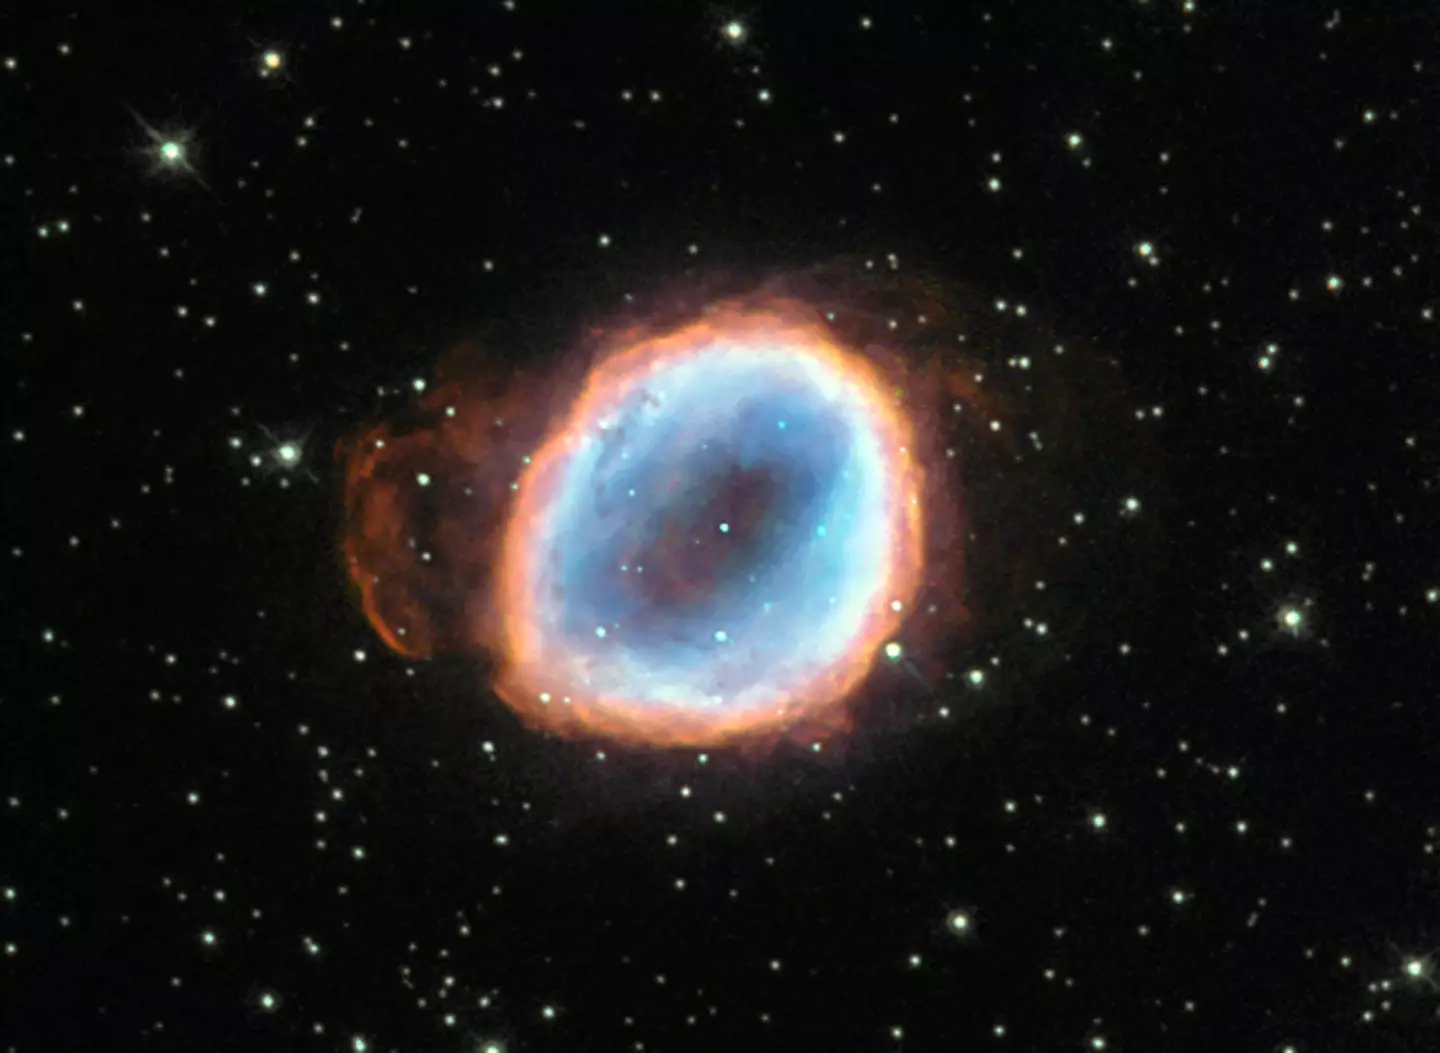 This image of a star's dying moment was taken by The Hubble Telescope in 2015.